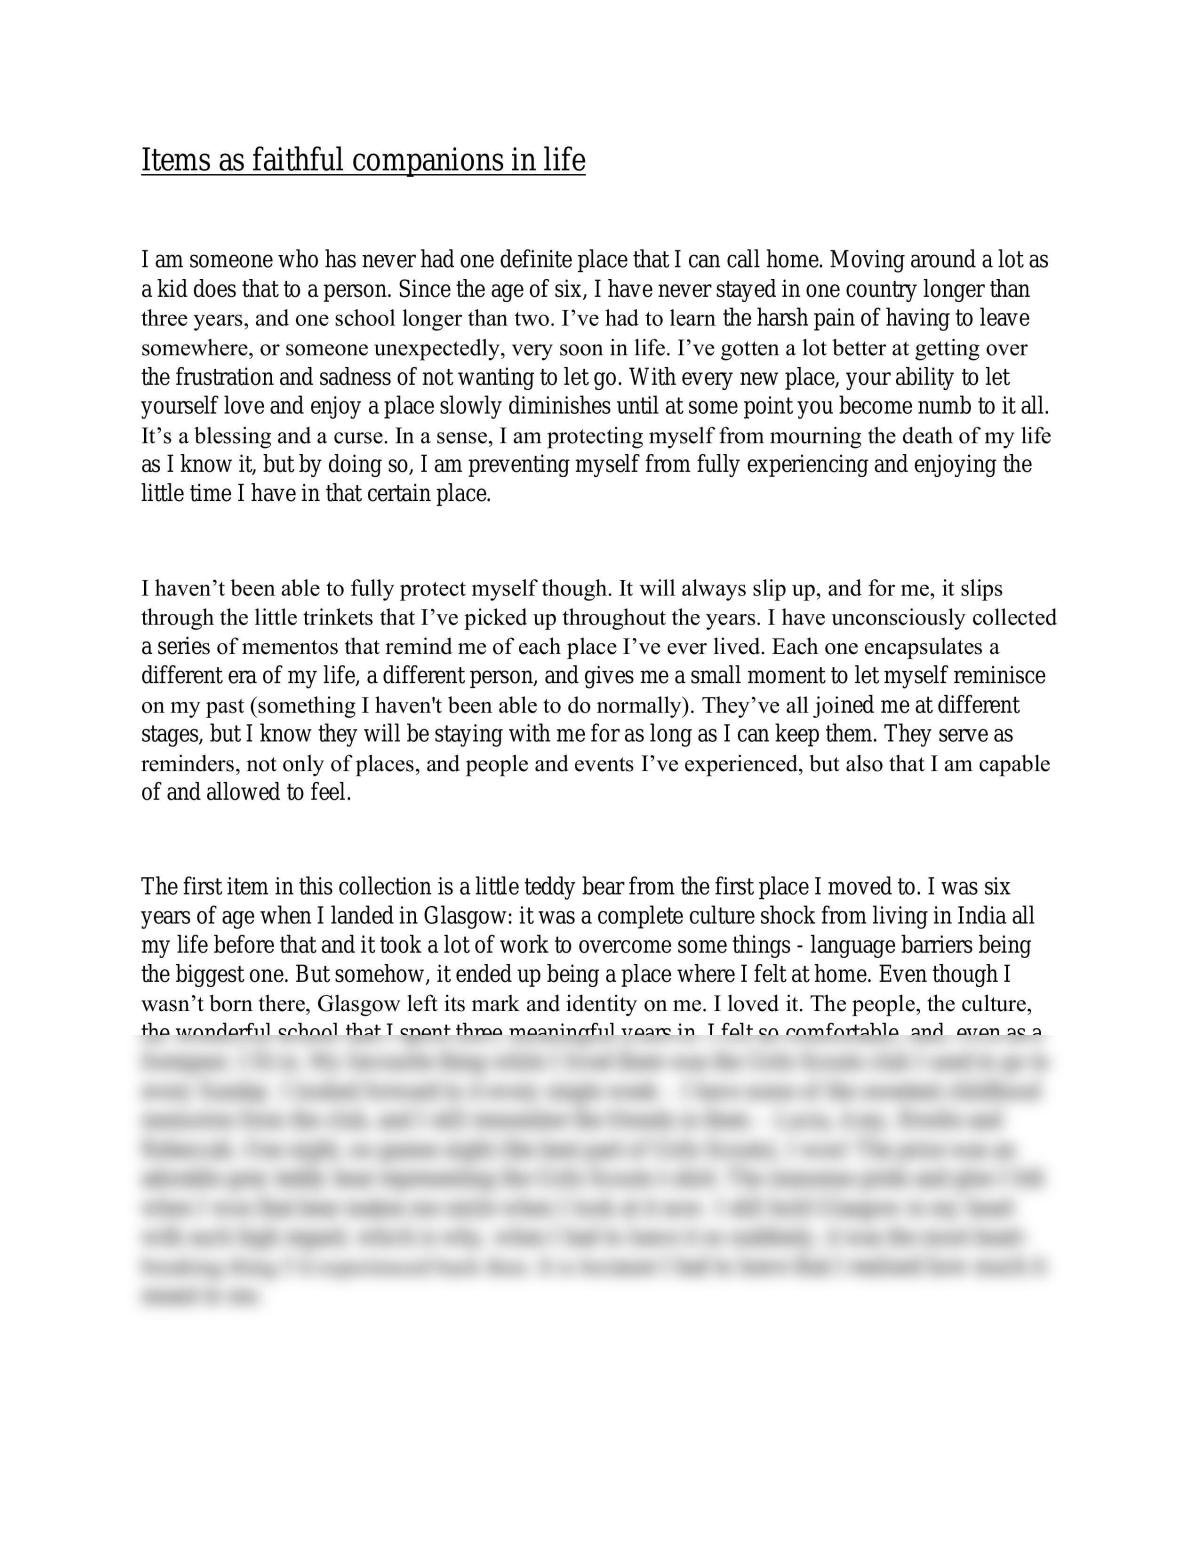 higher level english personal essay